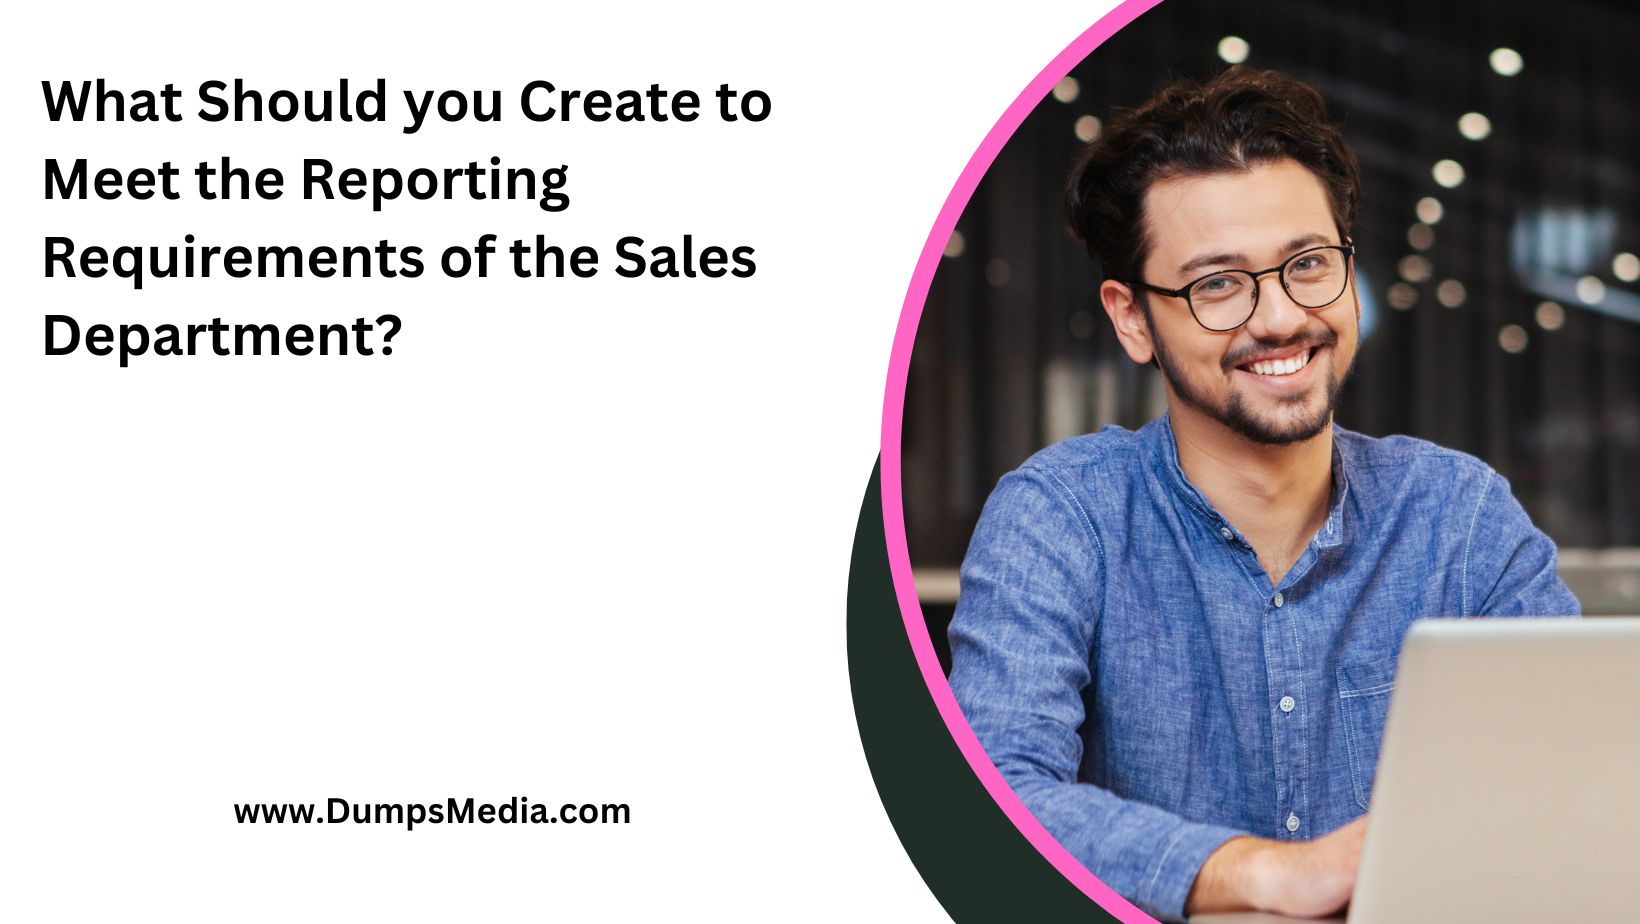 What Should you Create to Meet the Reporting Requirements of the Sales Department